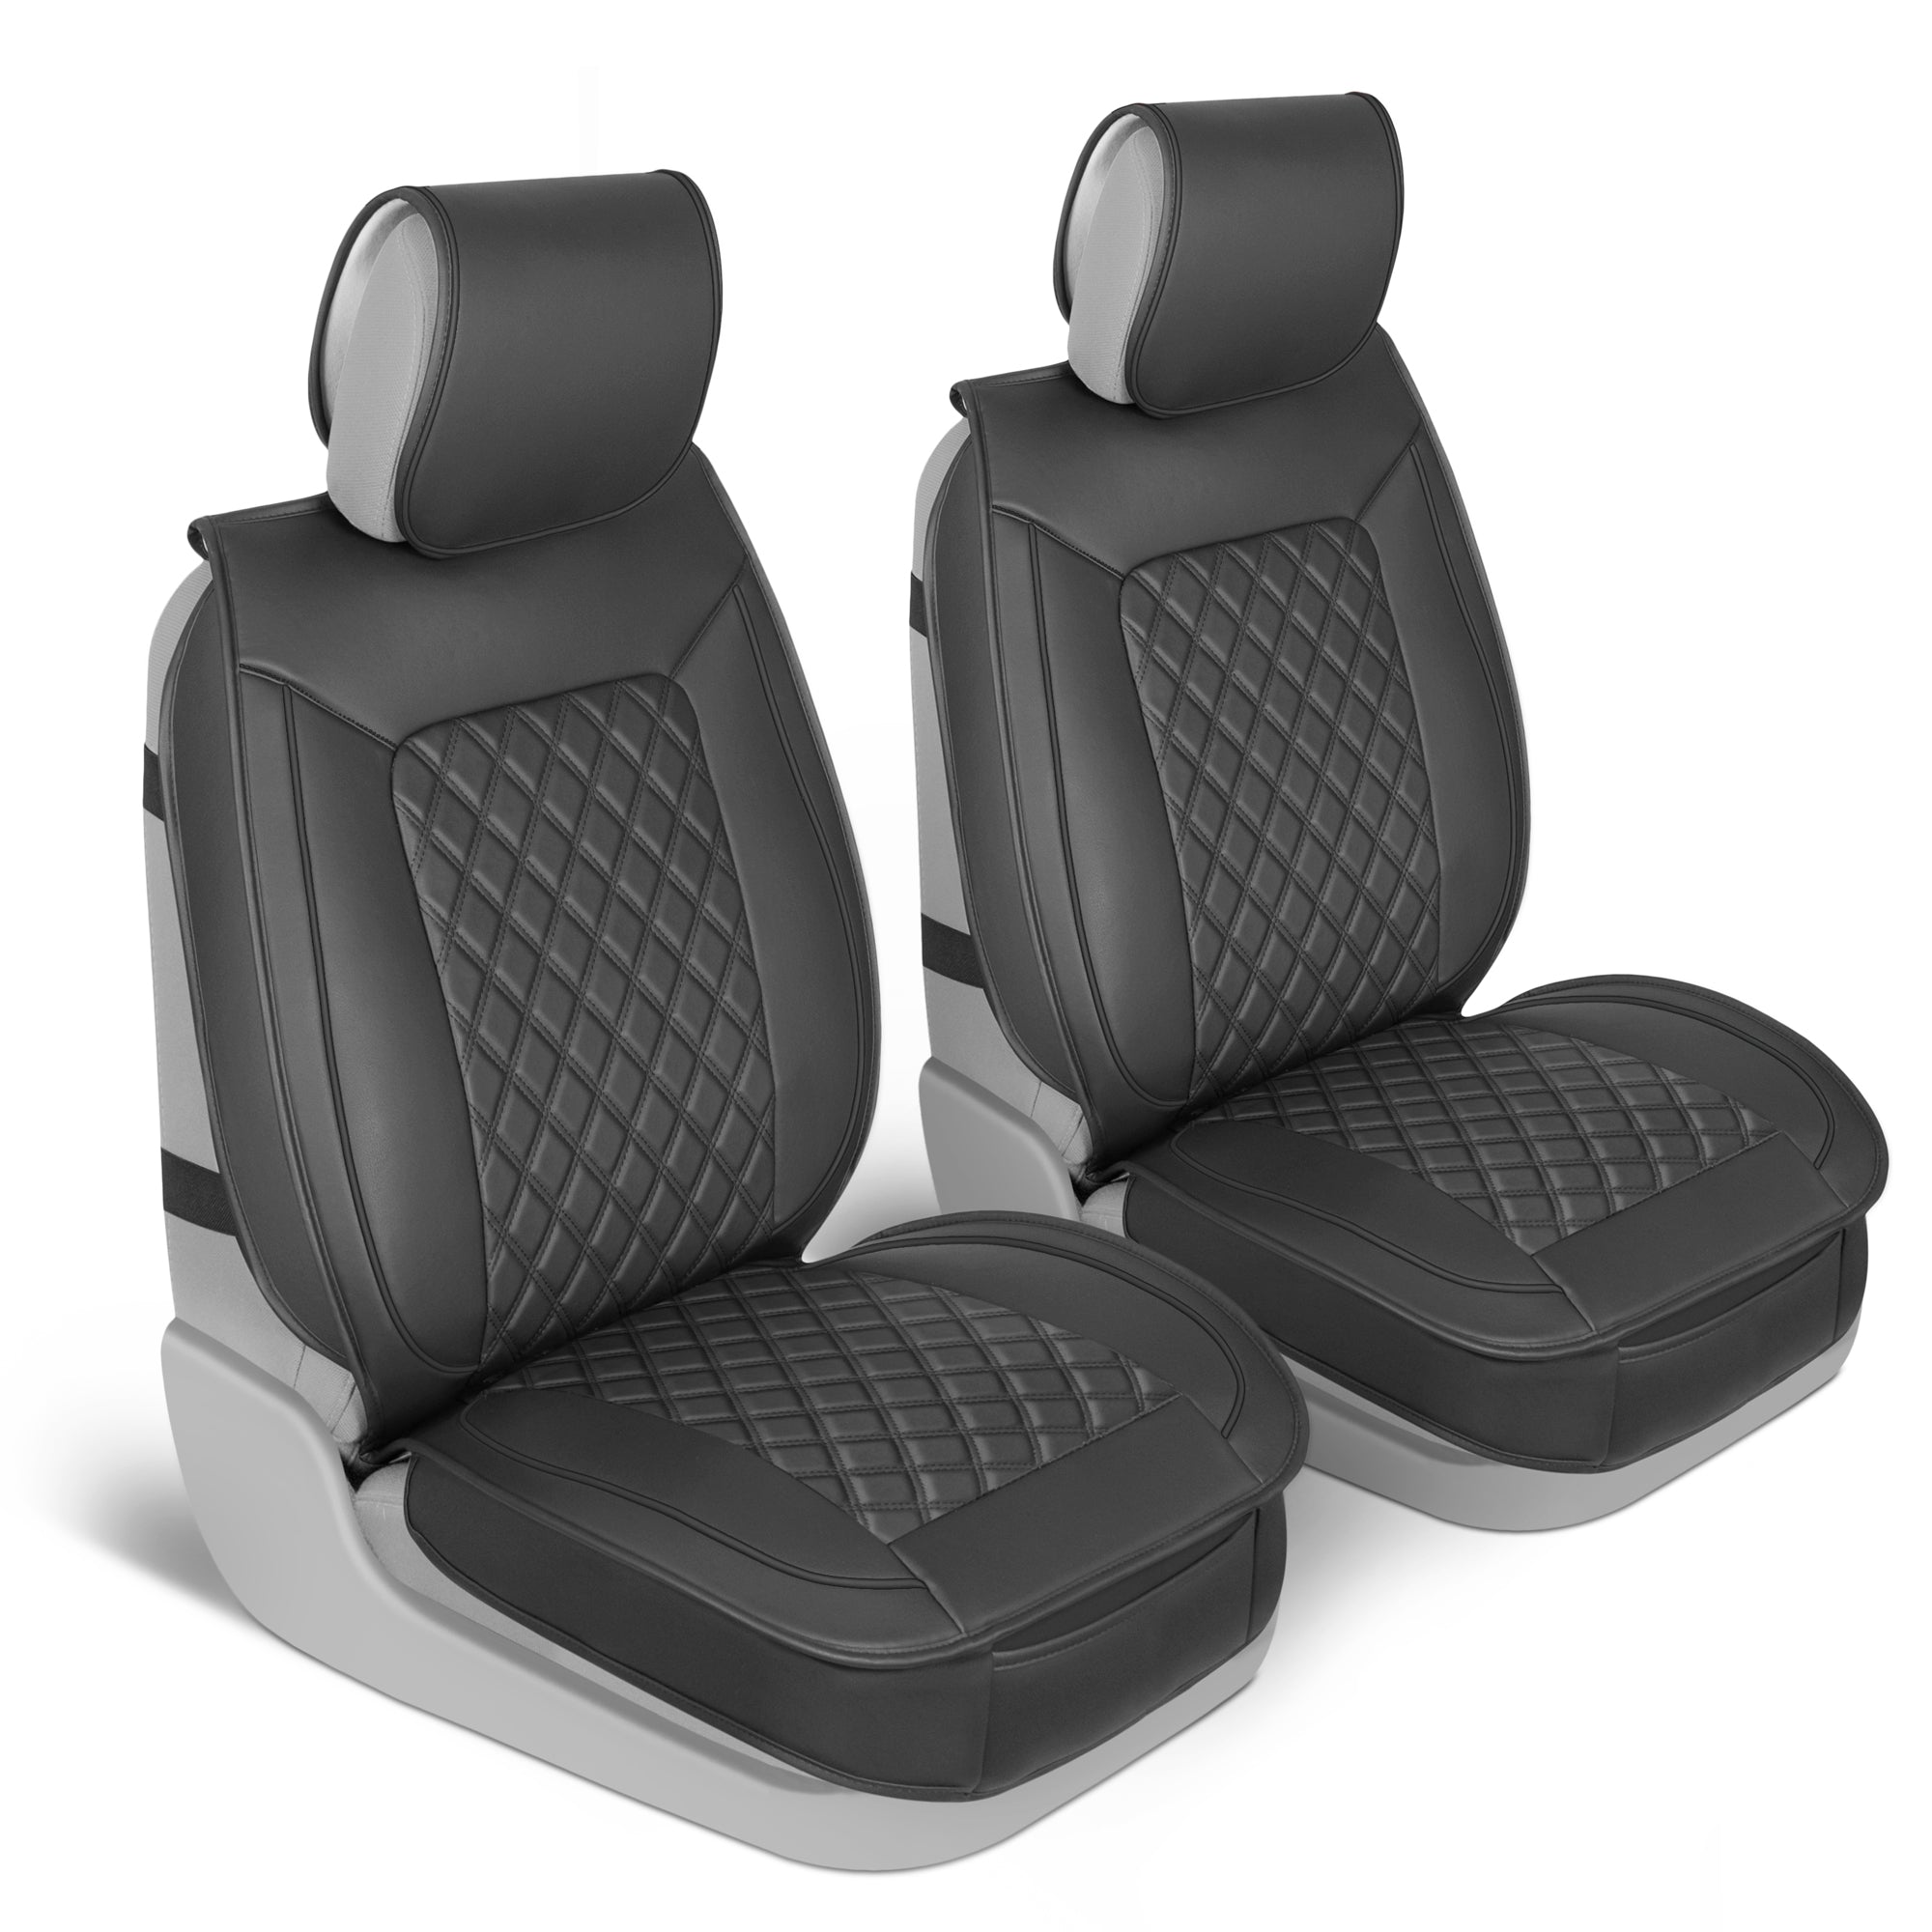 Motorbox Car Seat Covers – Prestige Edition Faux Leather Black Seat Covers for Car – Diamond Stitched Cushioned Seat Protectors for Automotive Accessories, Trucks, SUV, Car – Two Front Covers